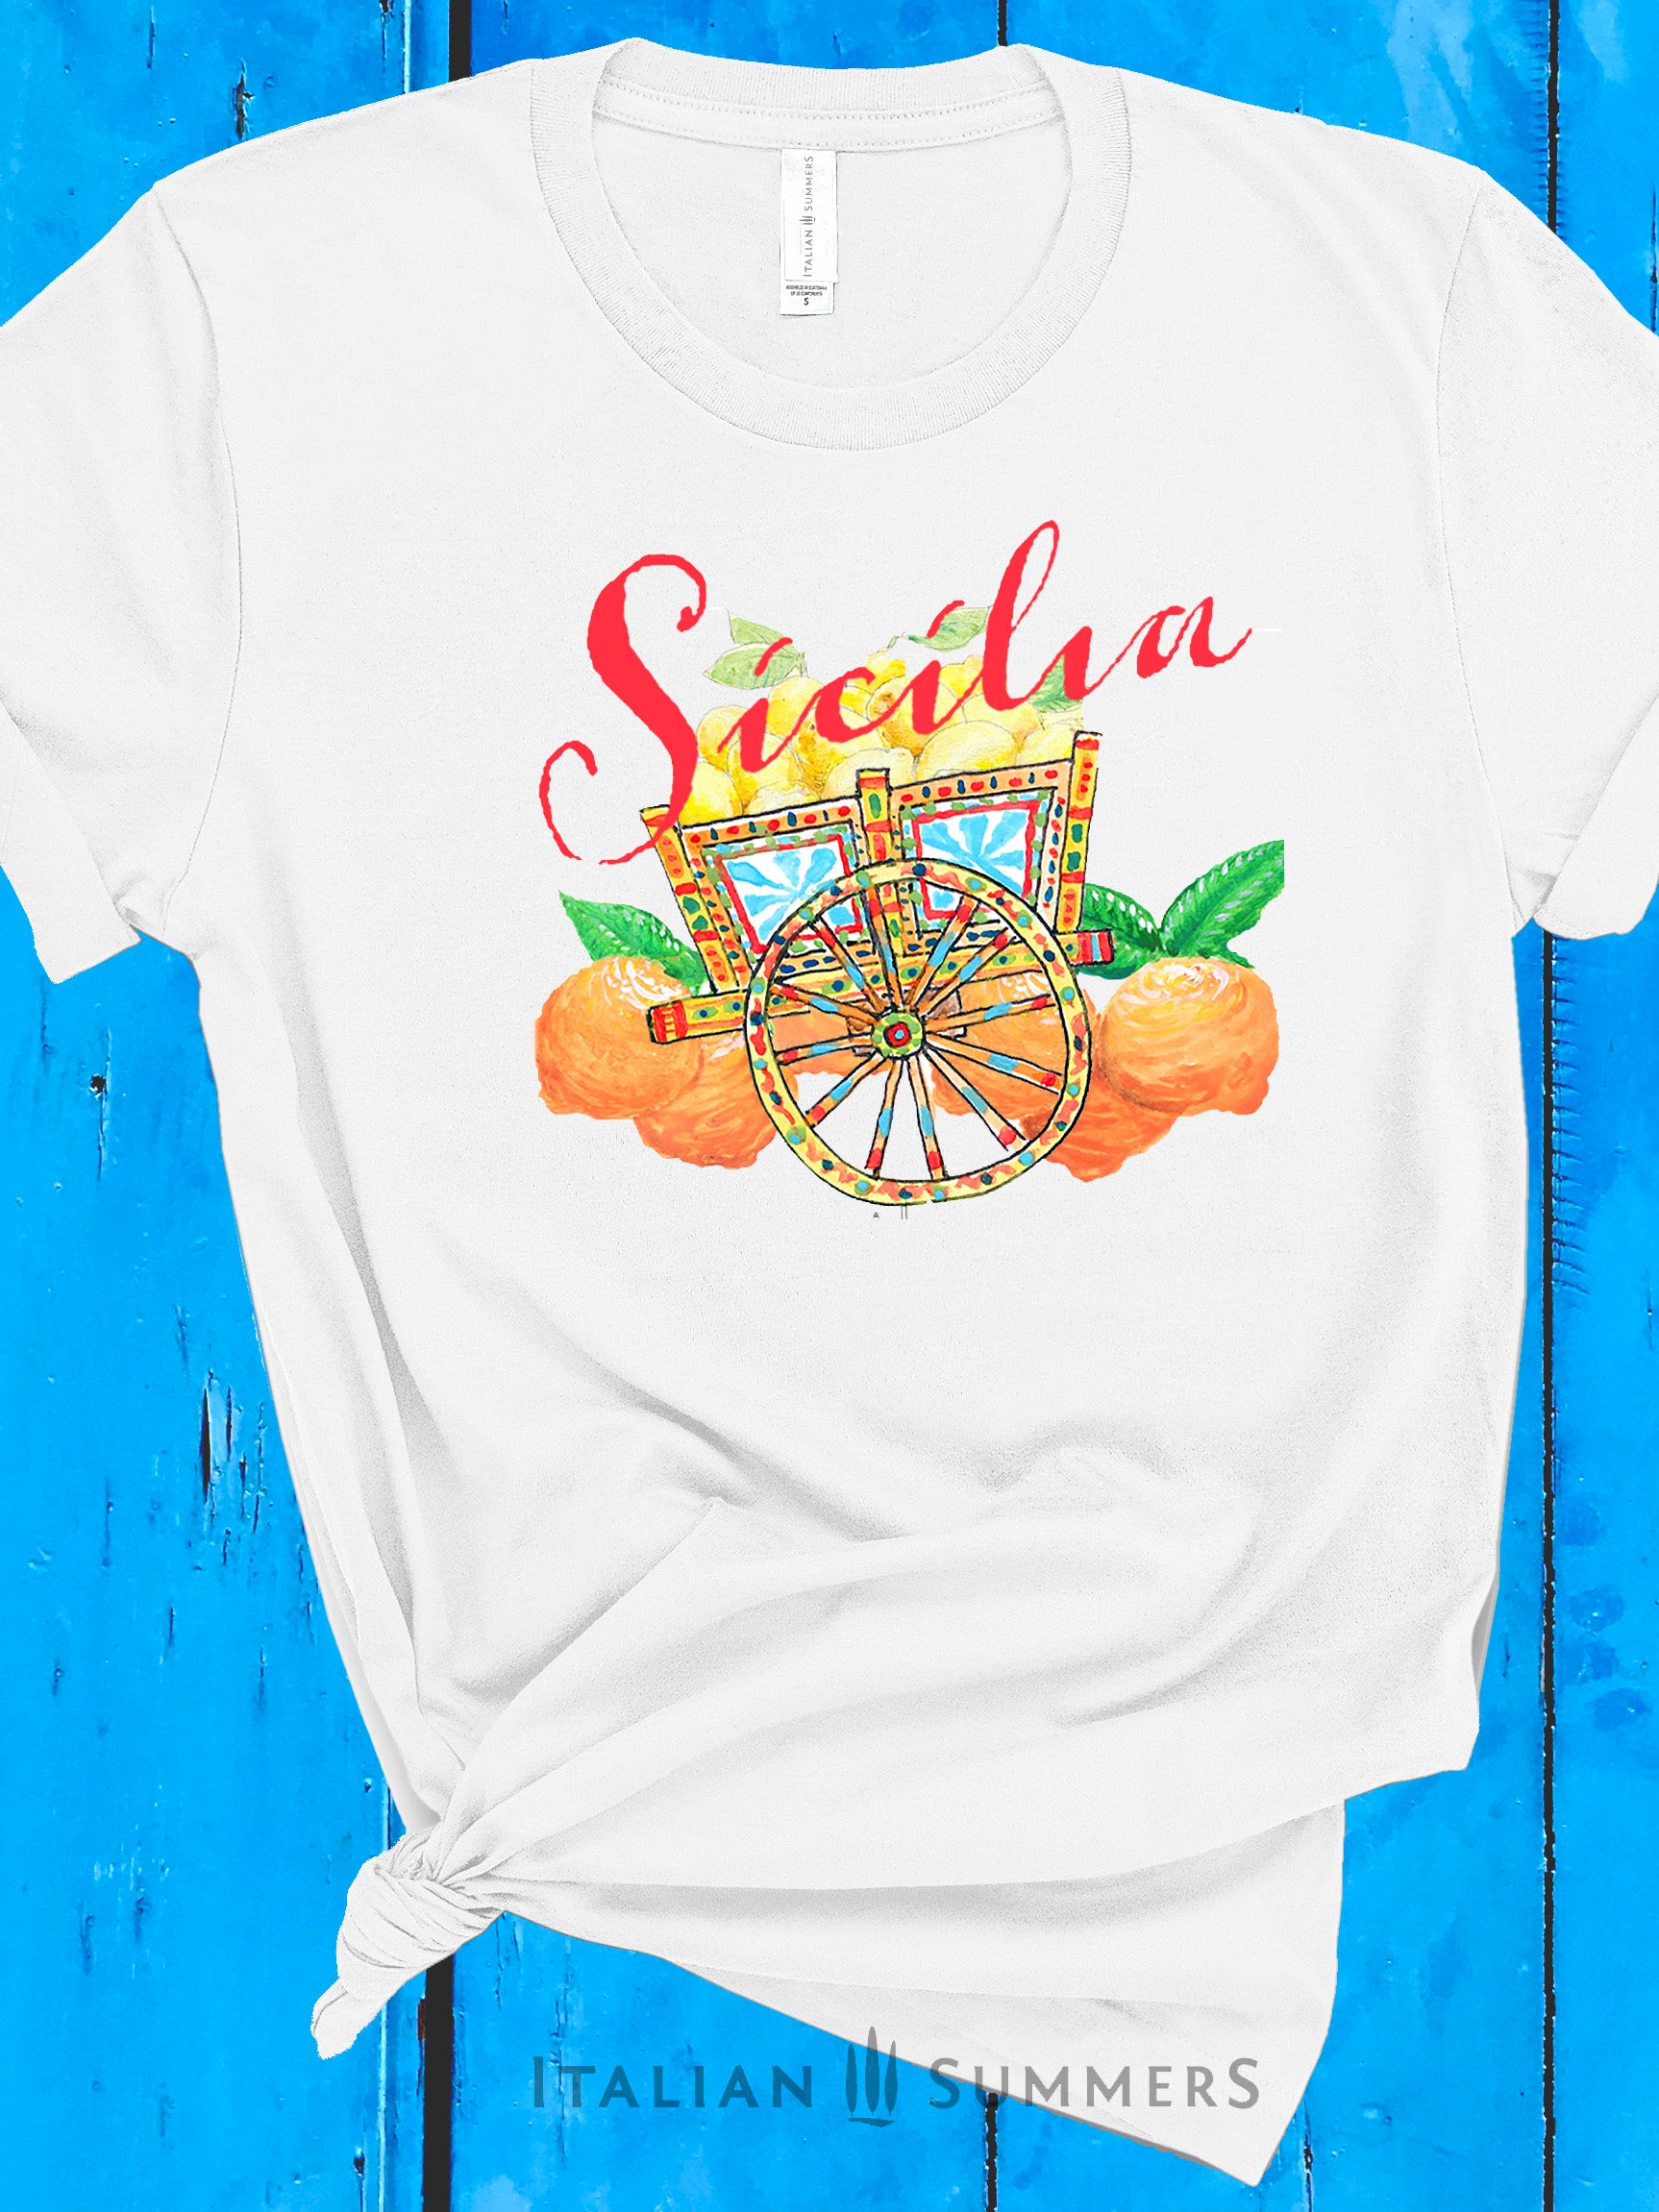 Italy Inspired White or Navy T shirt with hand-painted design of a colorful Sicilian cart , Sicilian oranges and lemons. The word 'Sicilia' is printed in red over the composition. Italy gift, designed by an Italian , made by Italian Summers